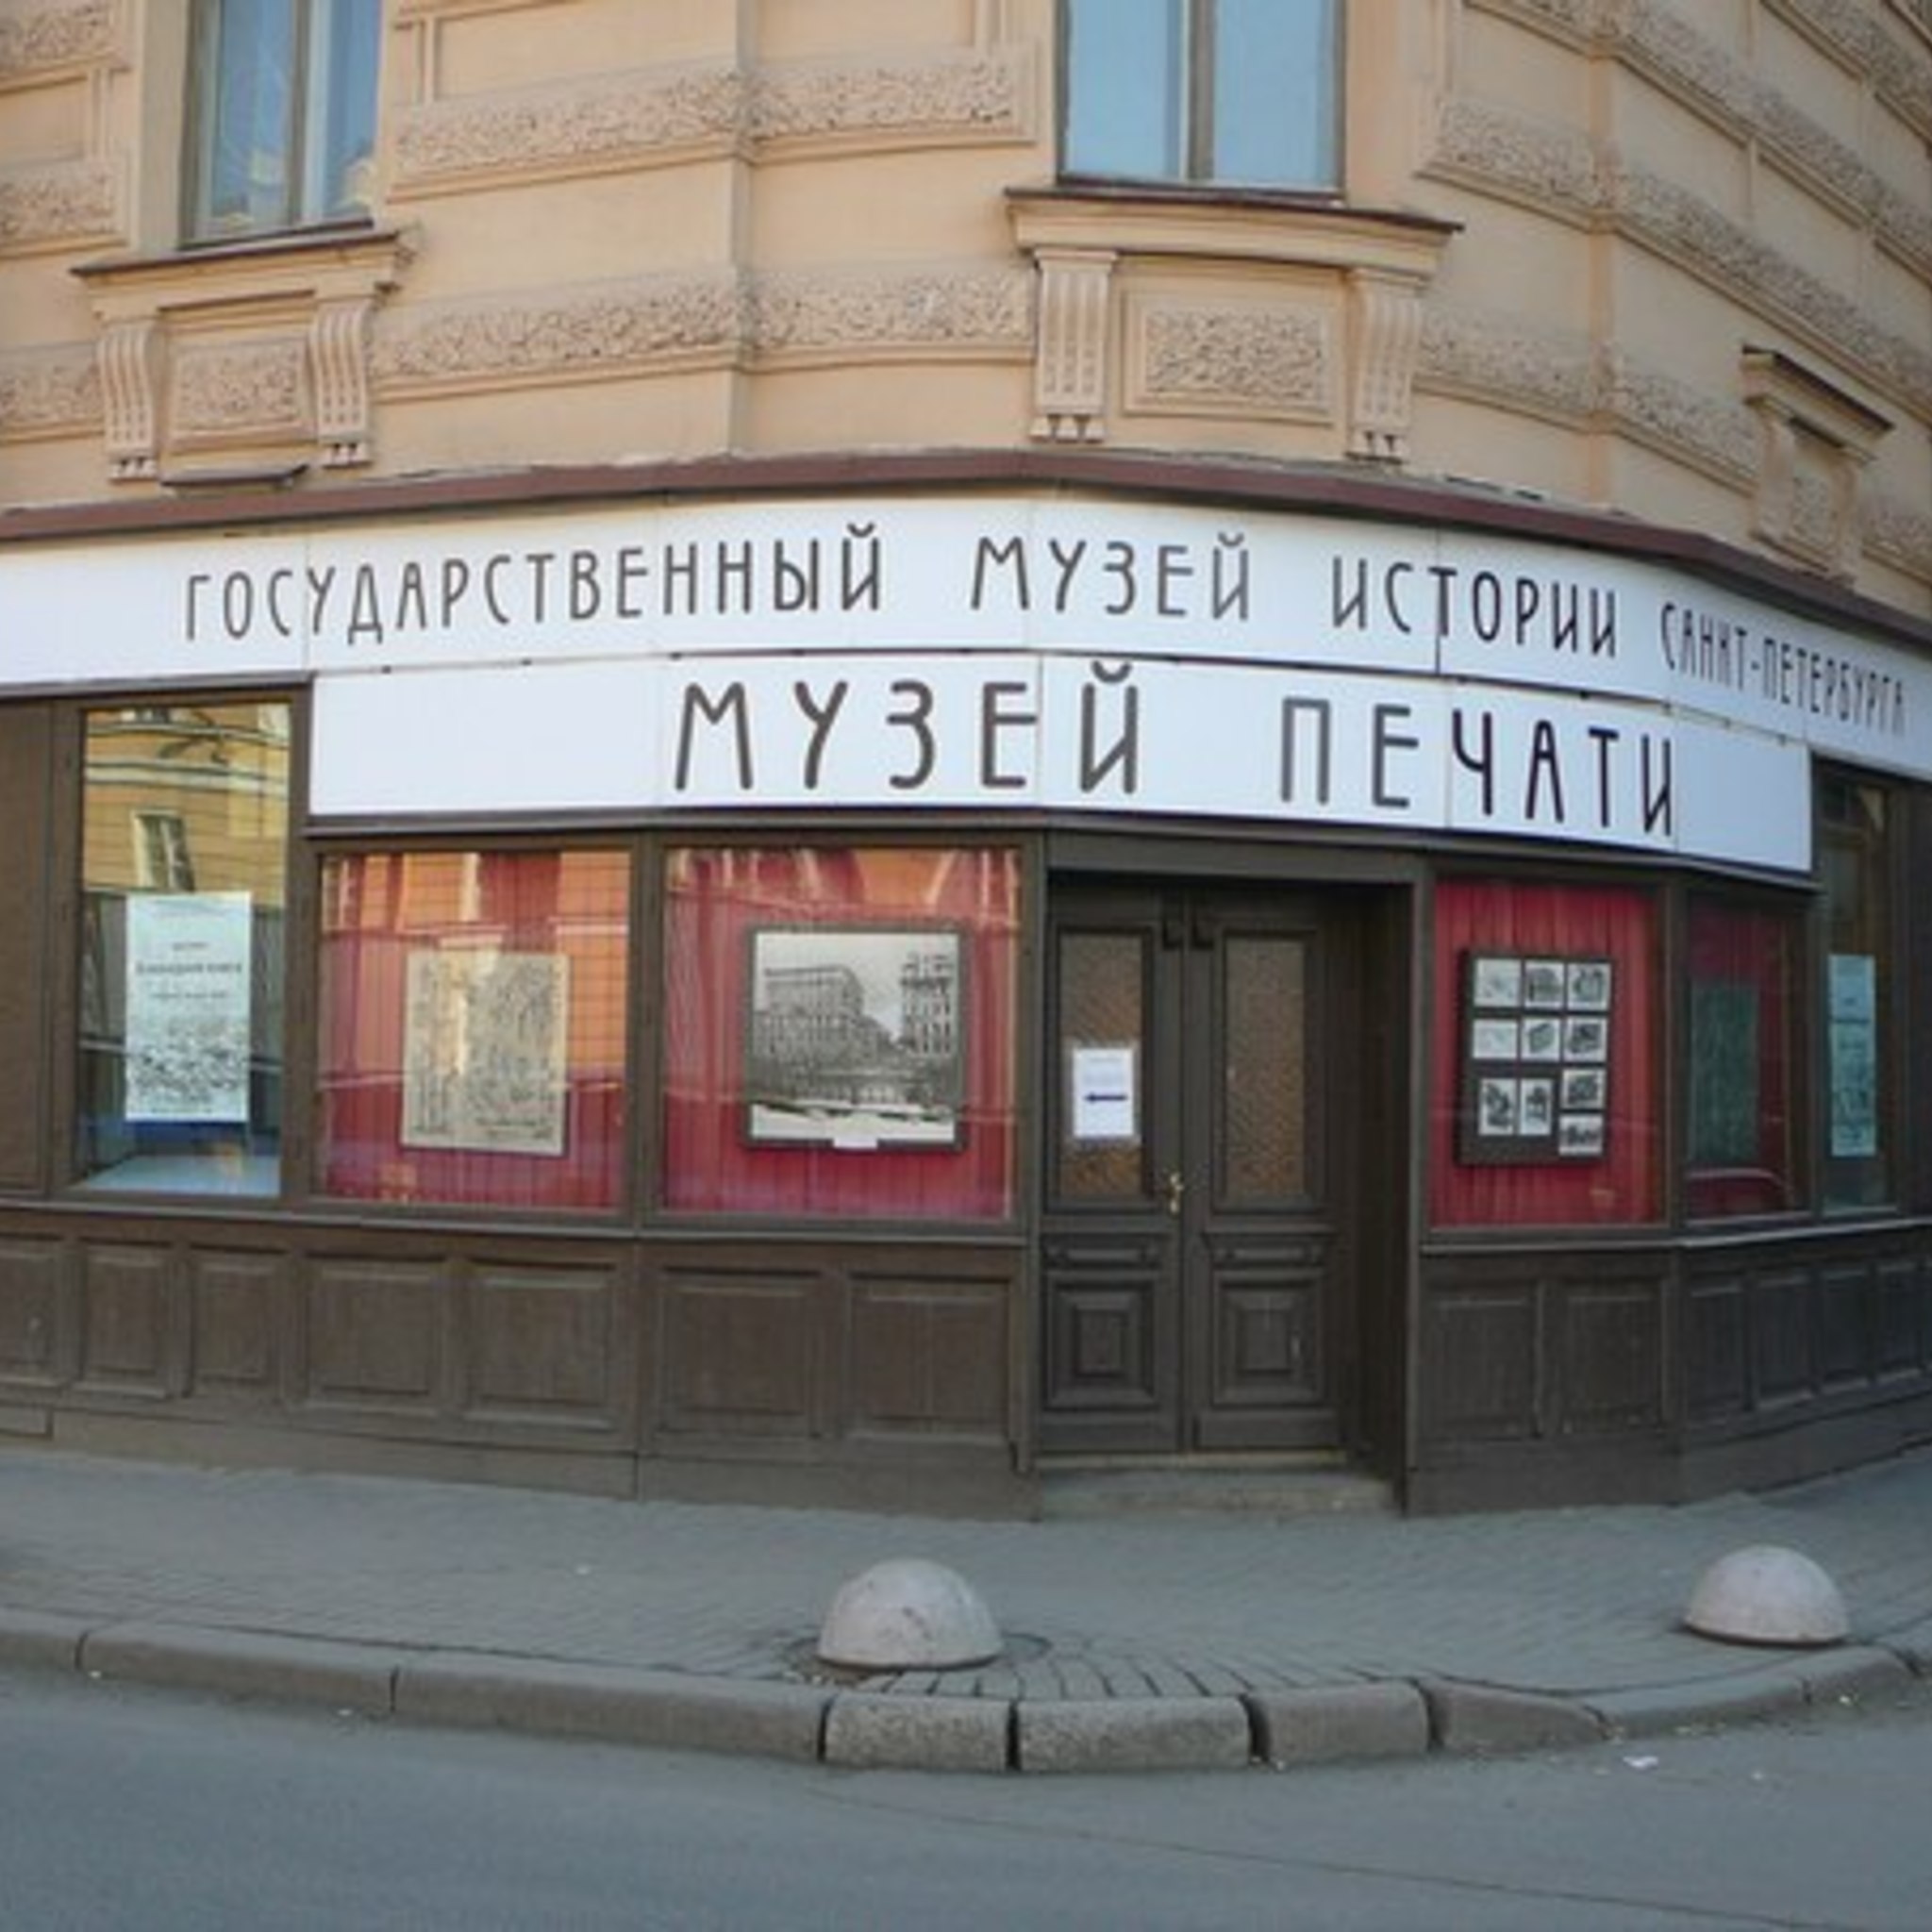 Schedule of events on September 2015 at the Museum of Printing St. Petersburg